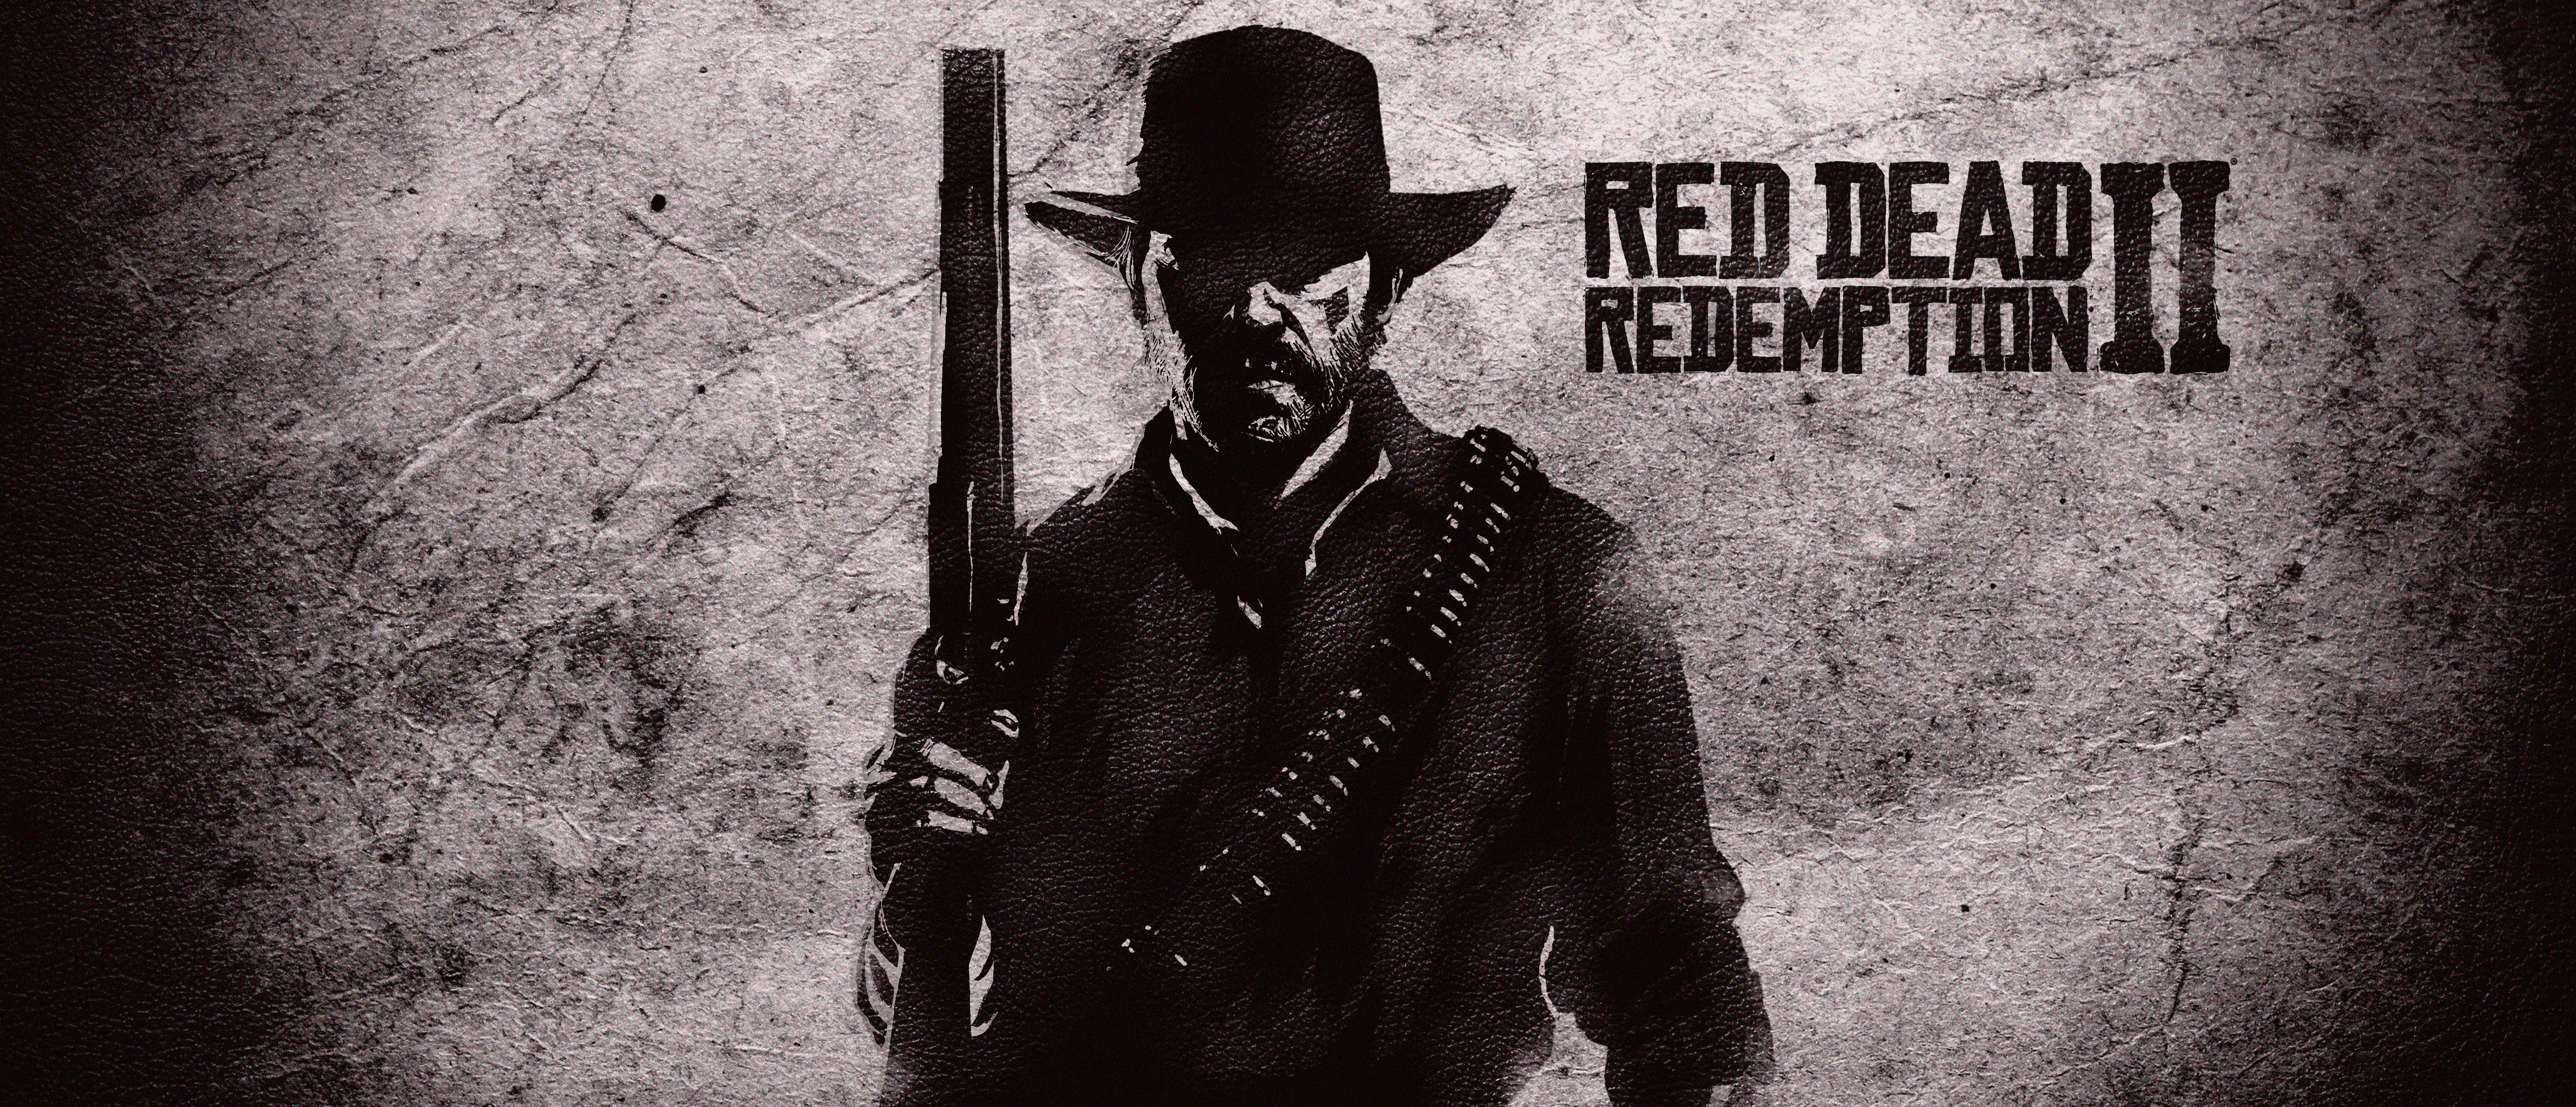 General 5120x2200 Red Dead Redemption Red Dead Redemption 2 Arthur Morgan Rockstar Games video games video game characters